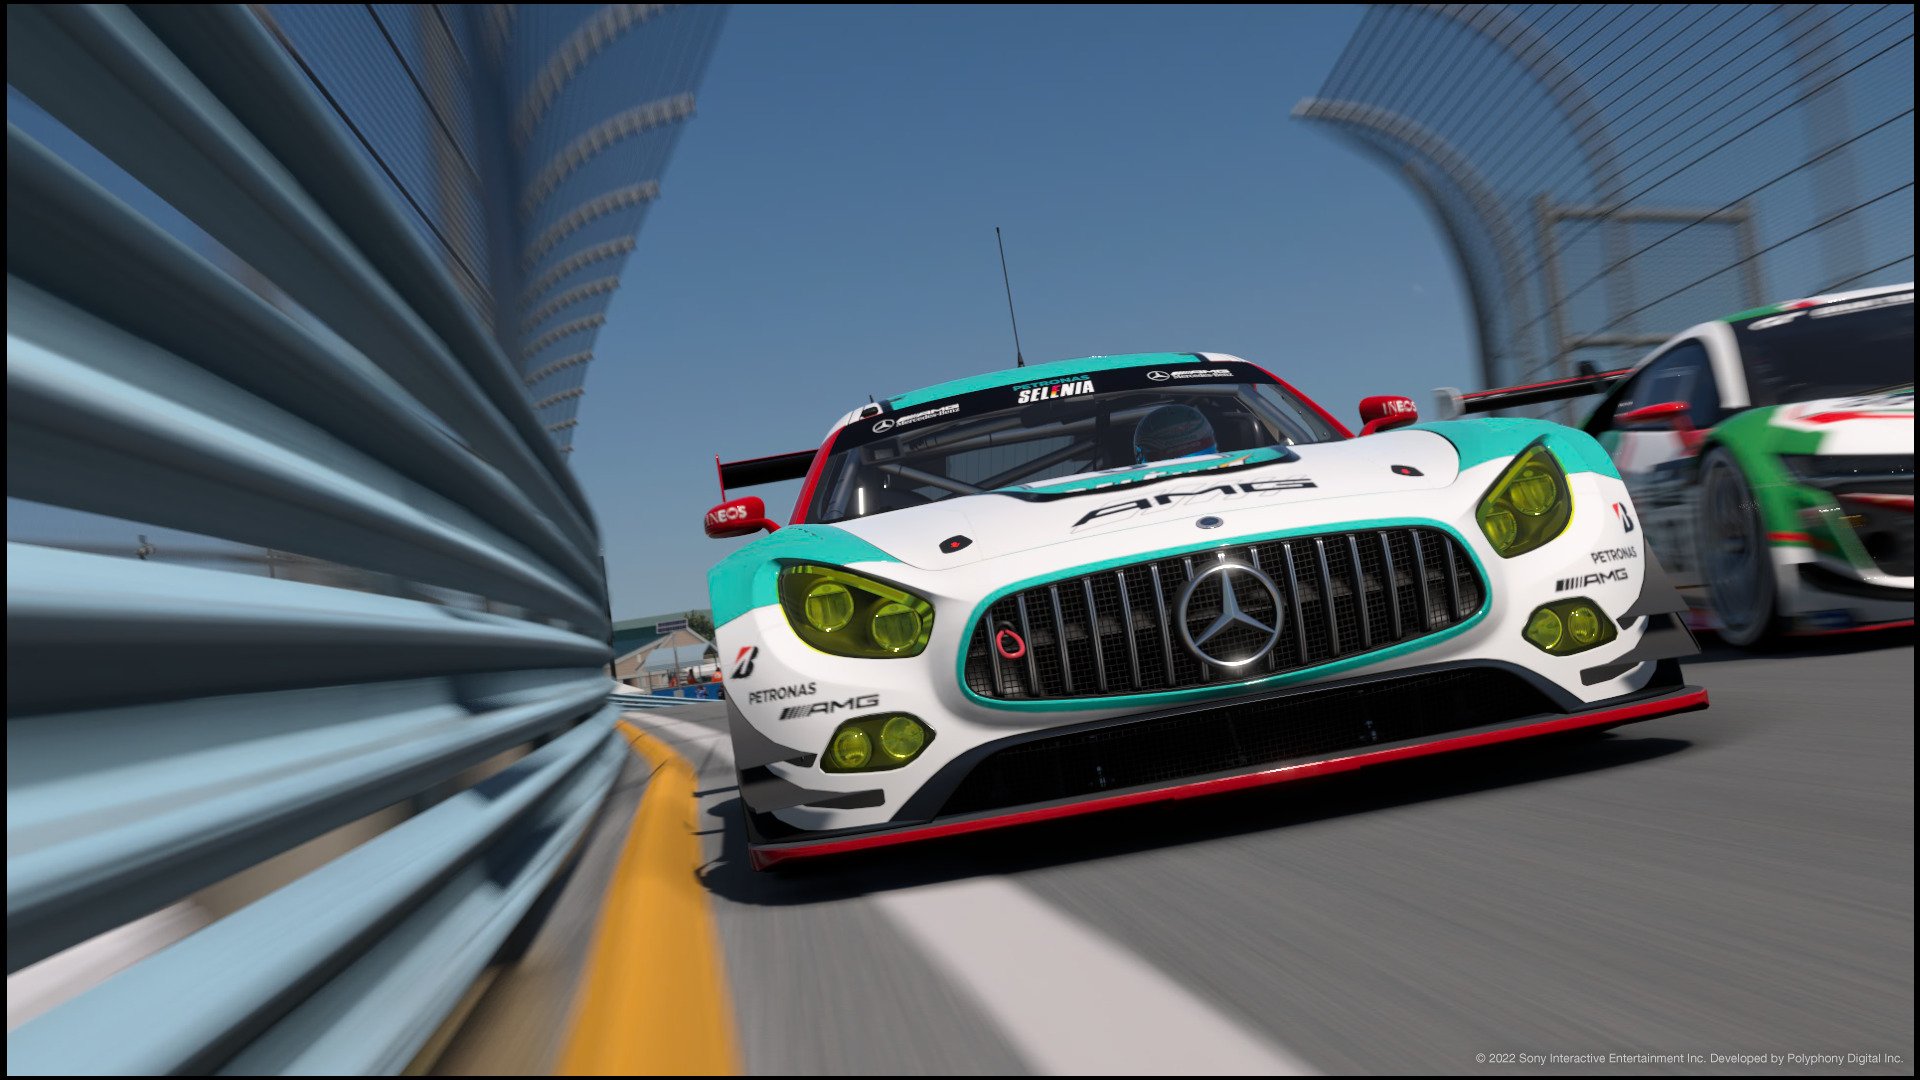 First impressions: Should you buy Gran Turismo 7 on PlayStation 4